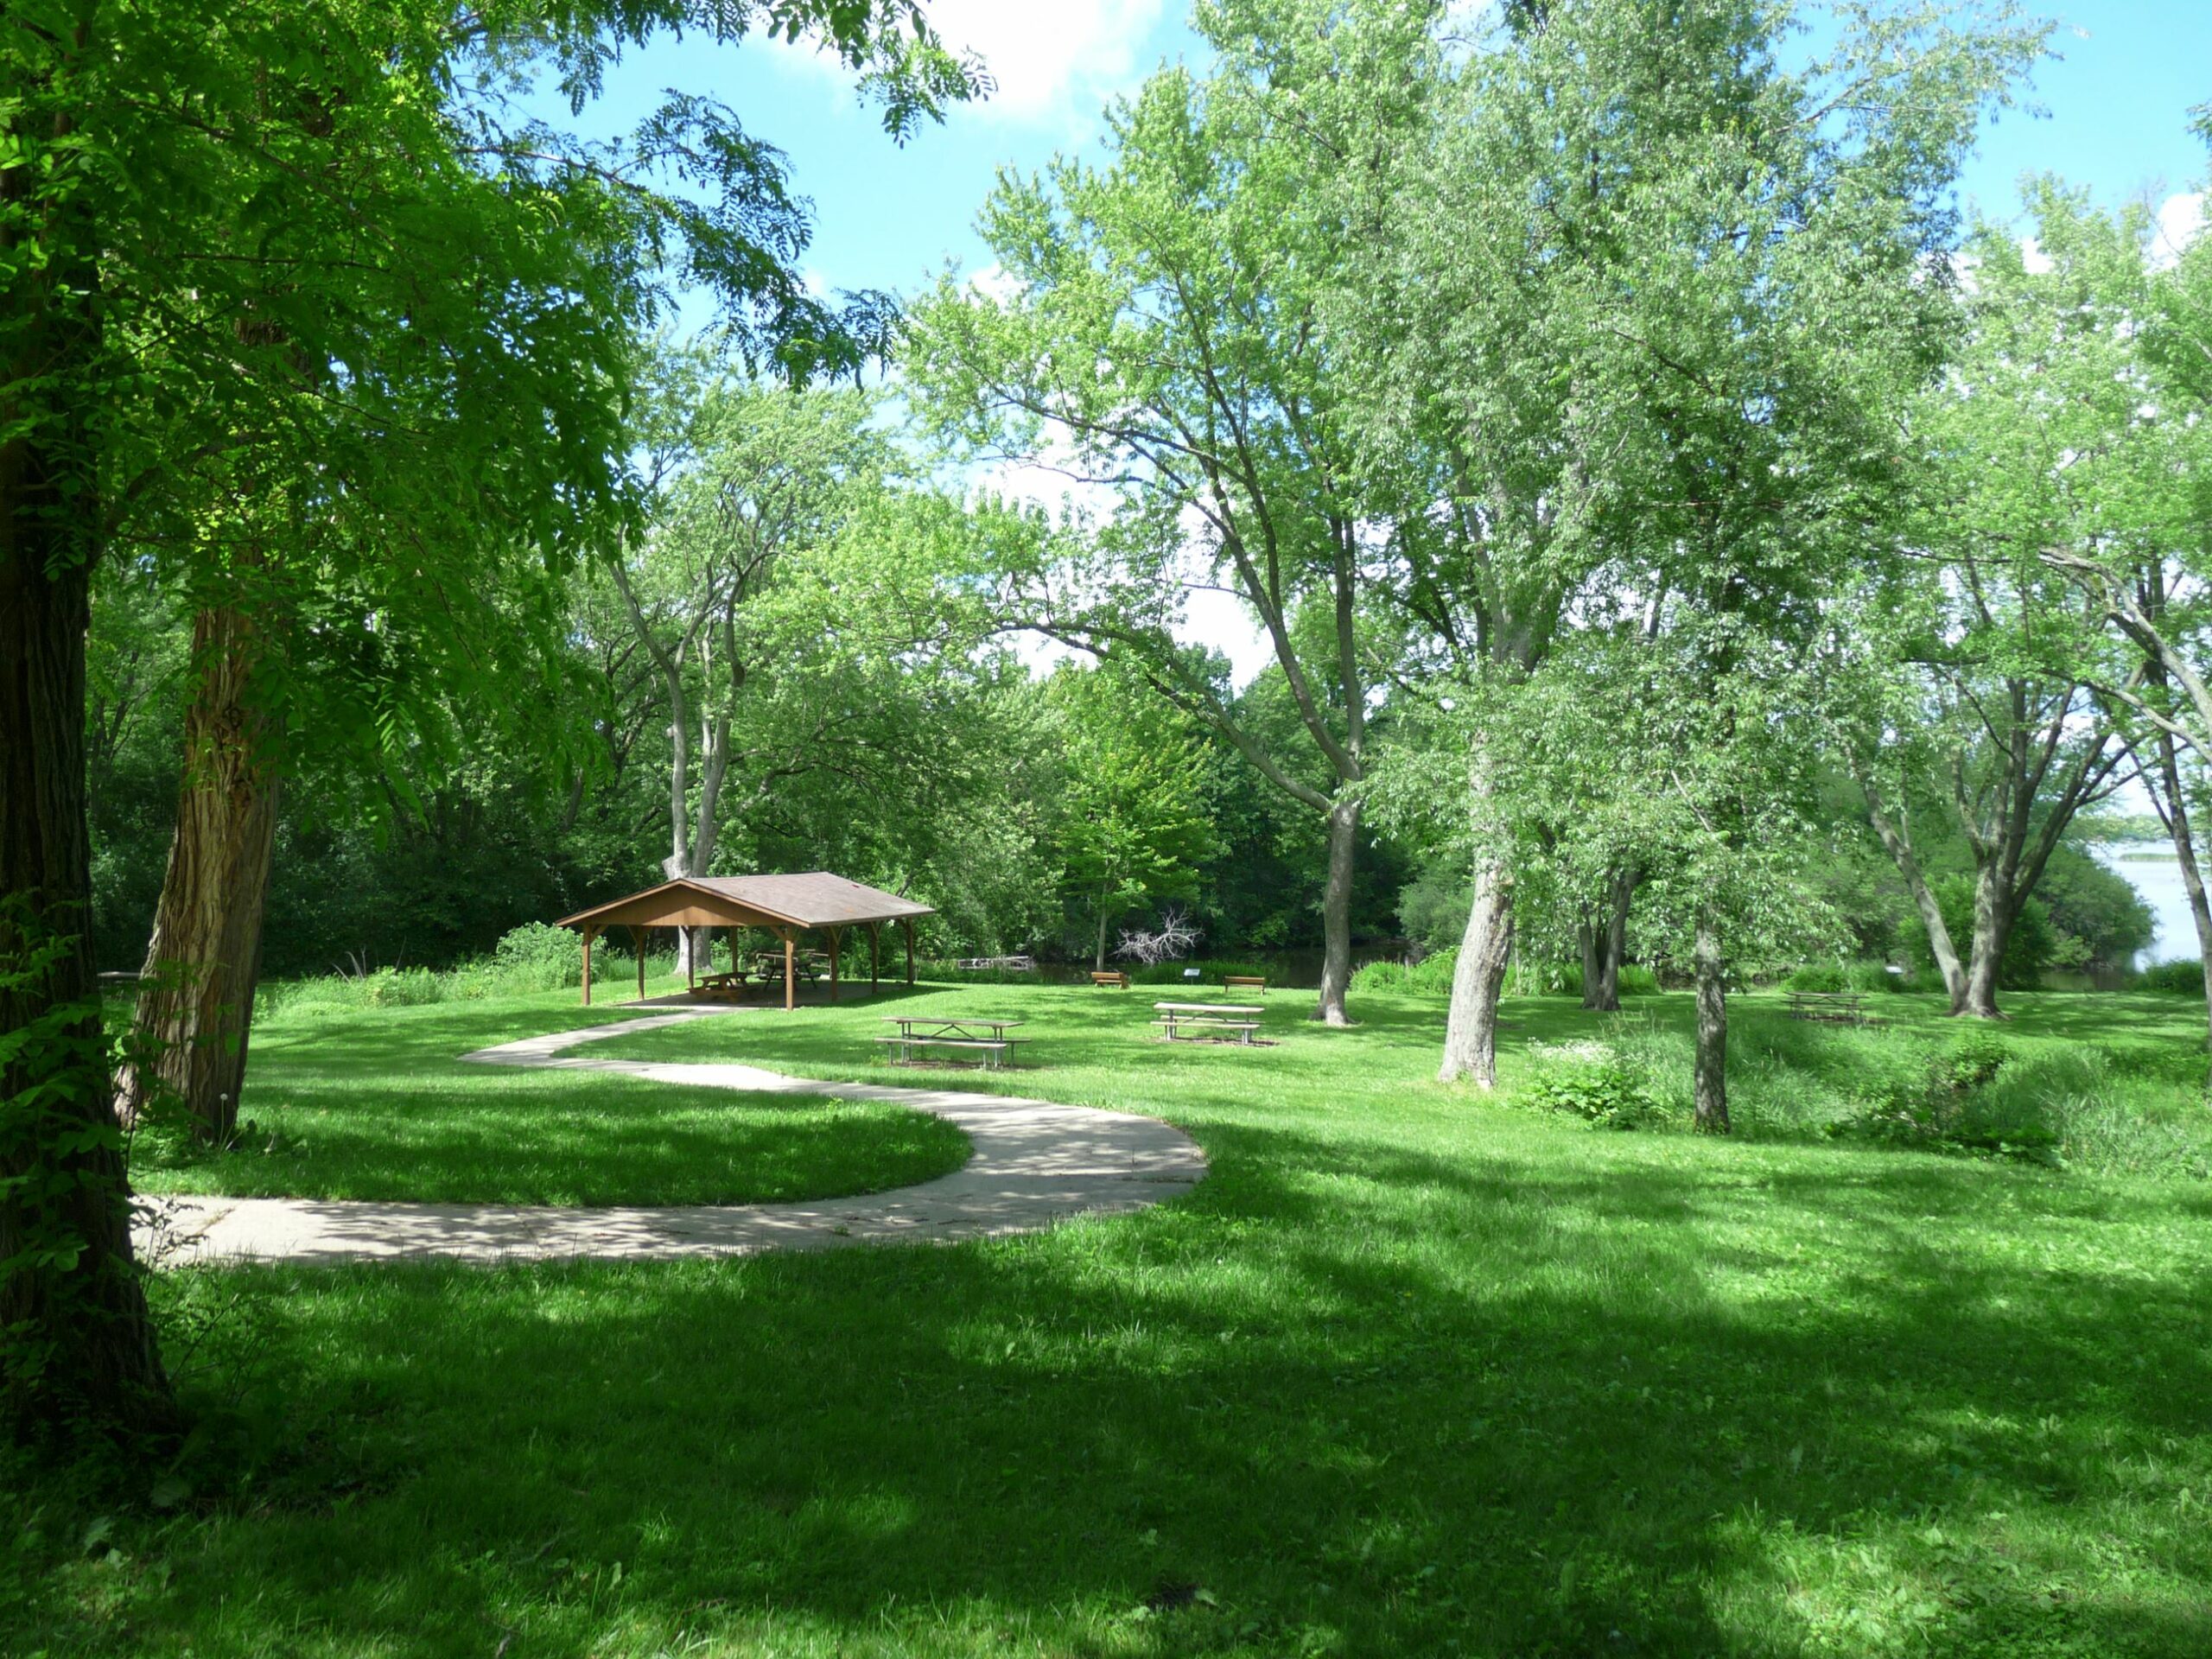 A landscape photo of a grassy park area. A winding sidewalk passes by picnic benches and ends at a park shelter in the middle of a grassy field.